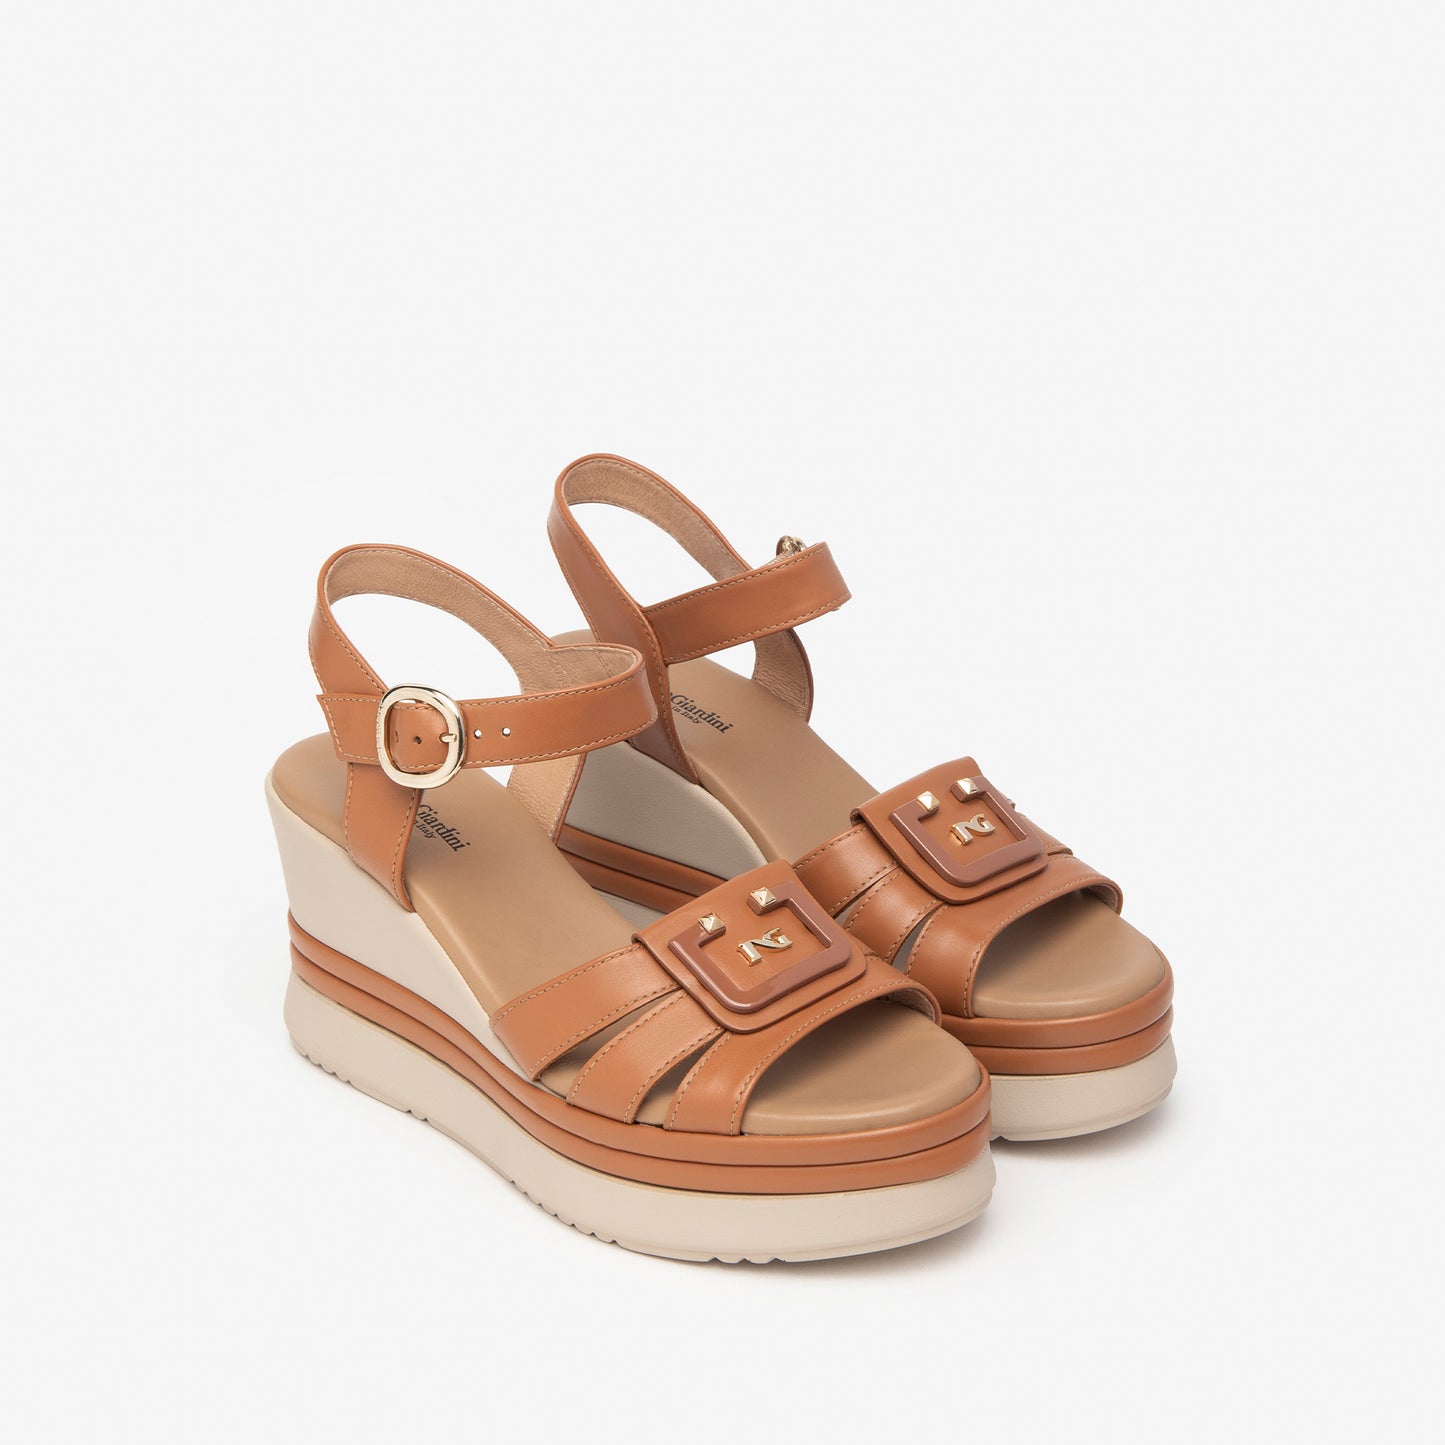 Cassiopee Camel Sandals